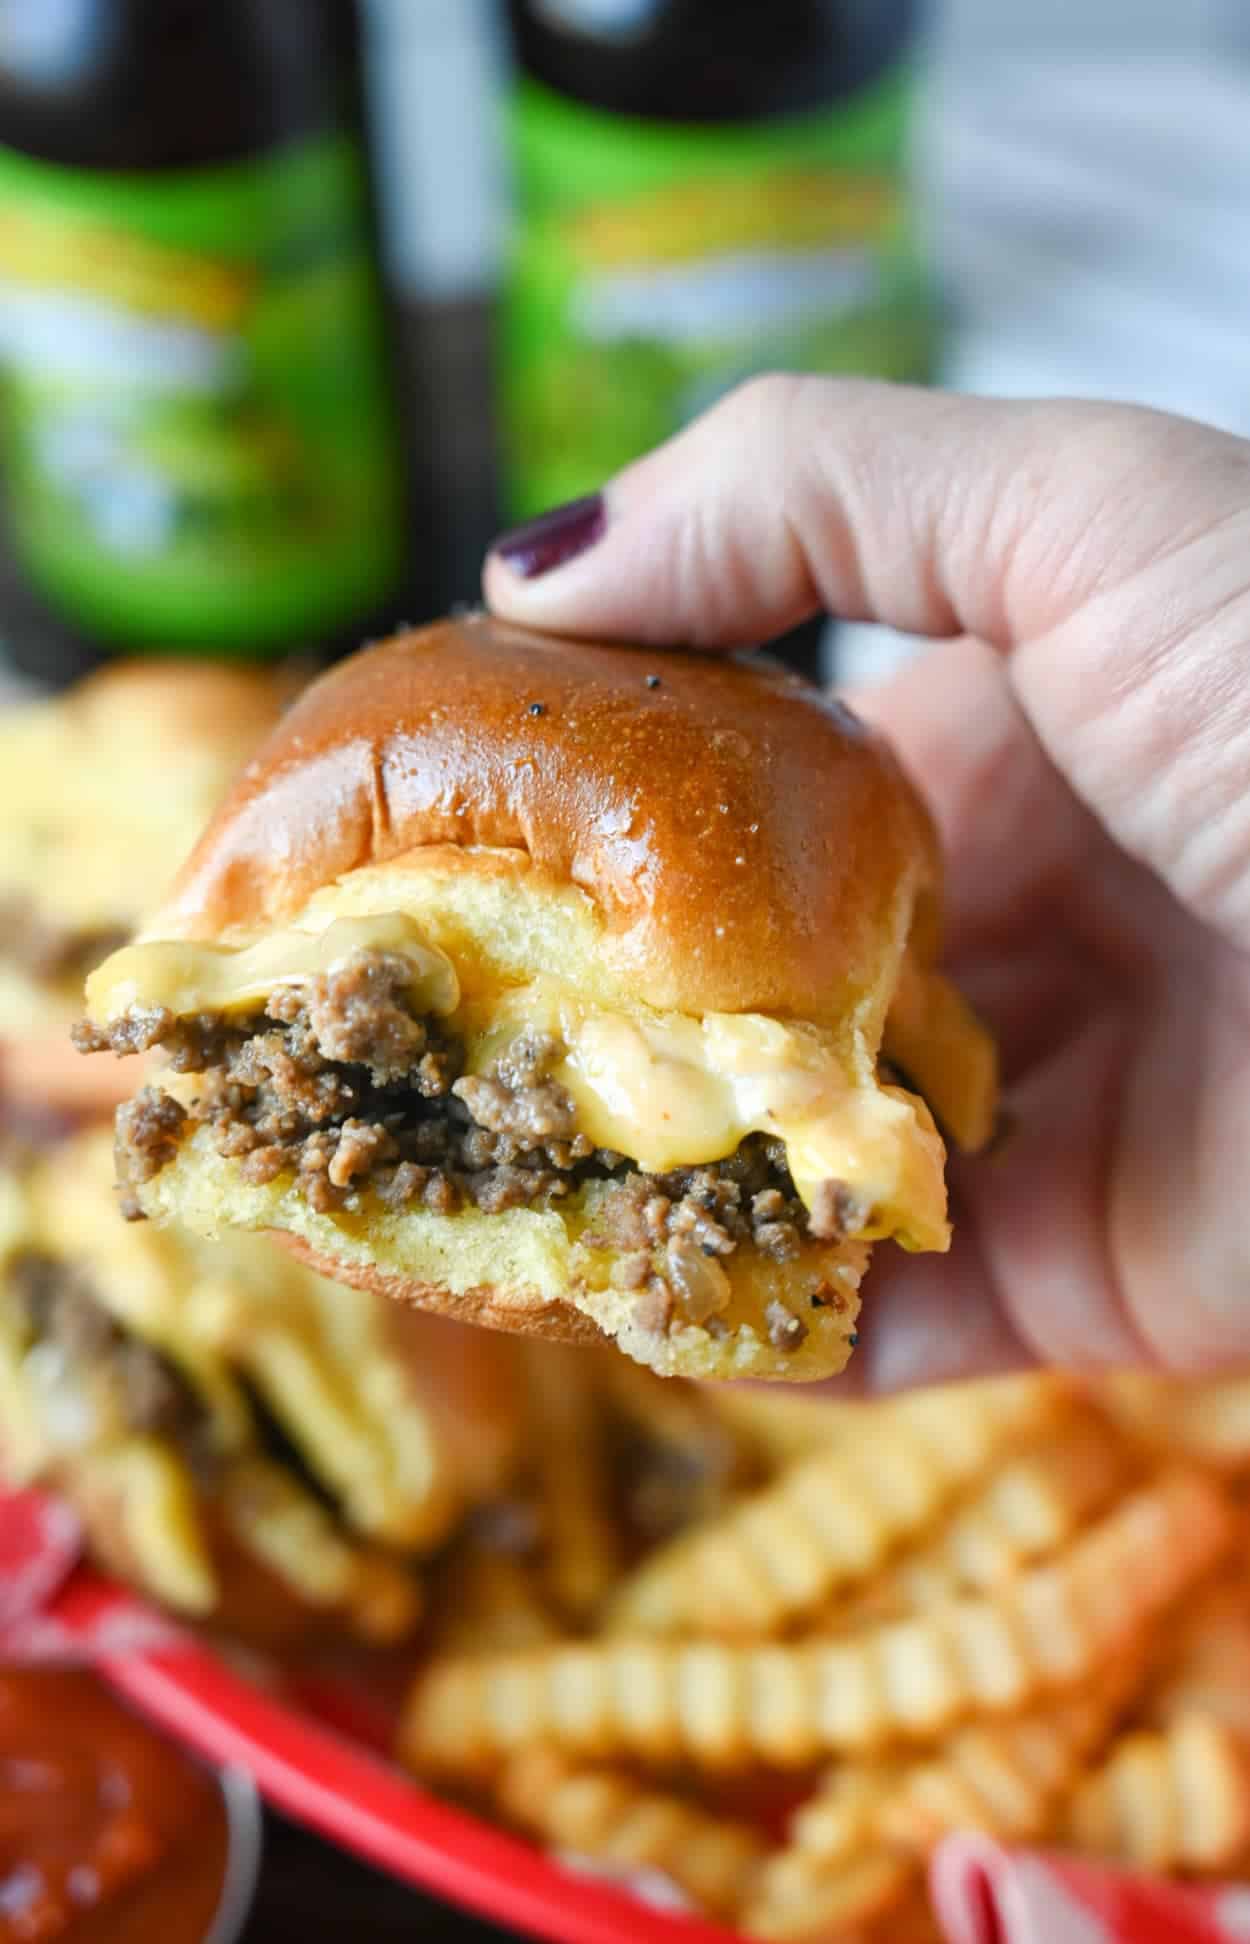 A slider being held in a hand.